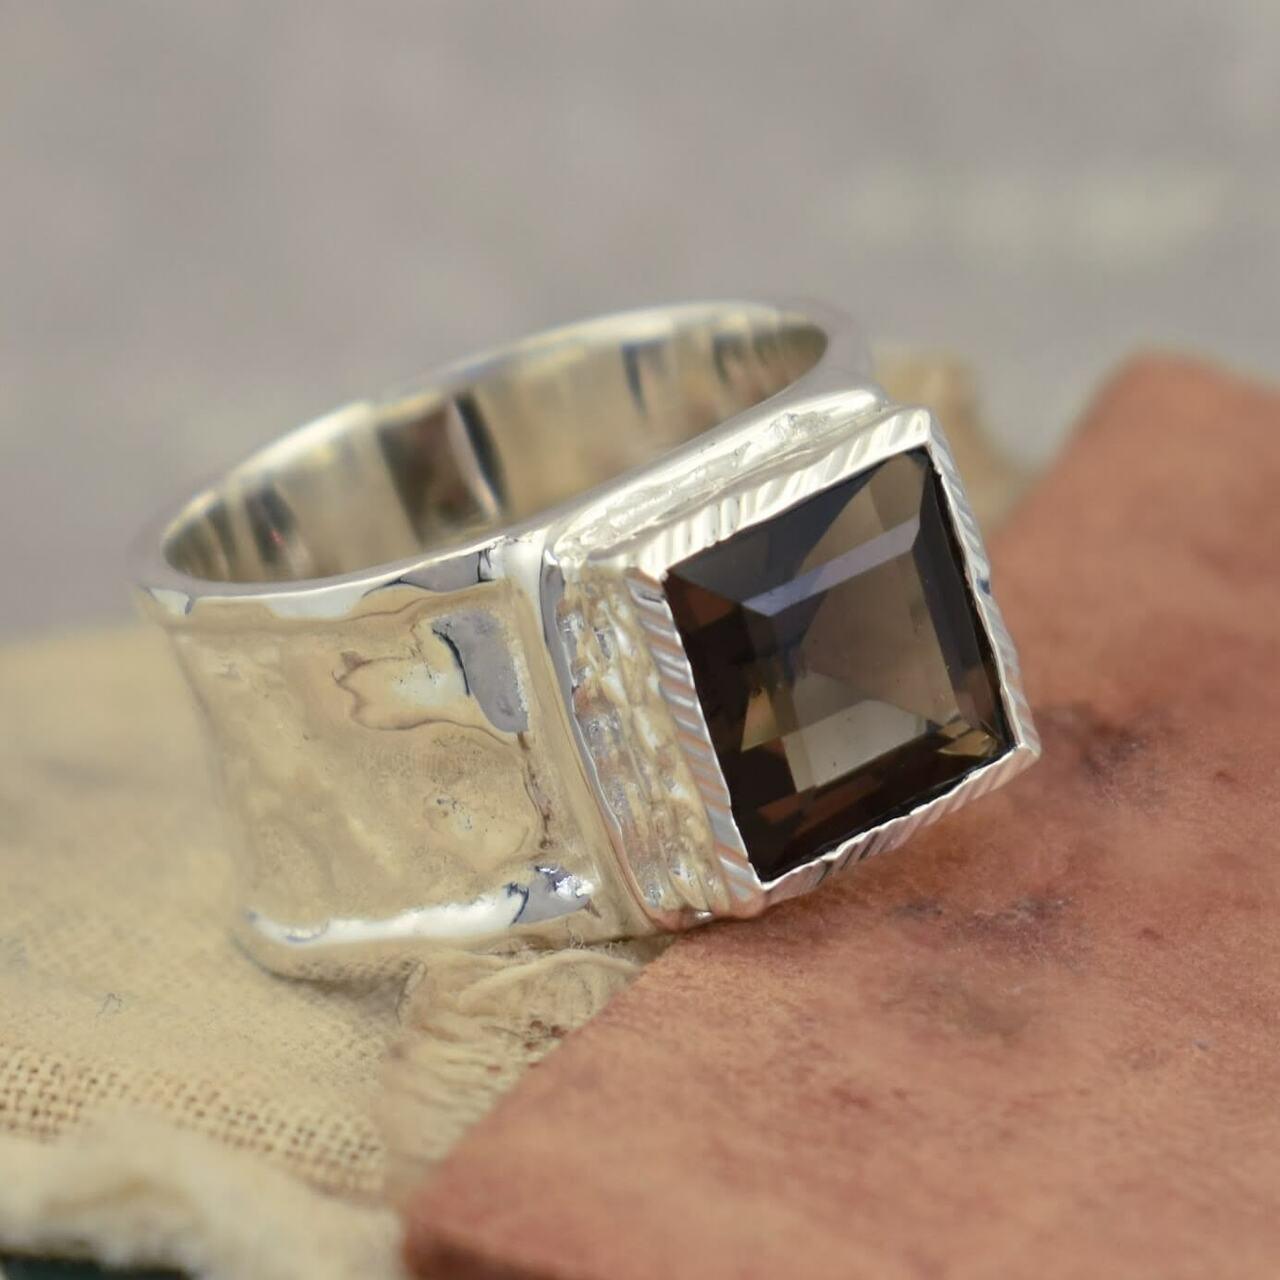 Handcrafted sterling silver and smoky quartz designer ring